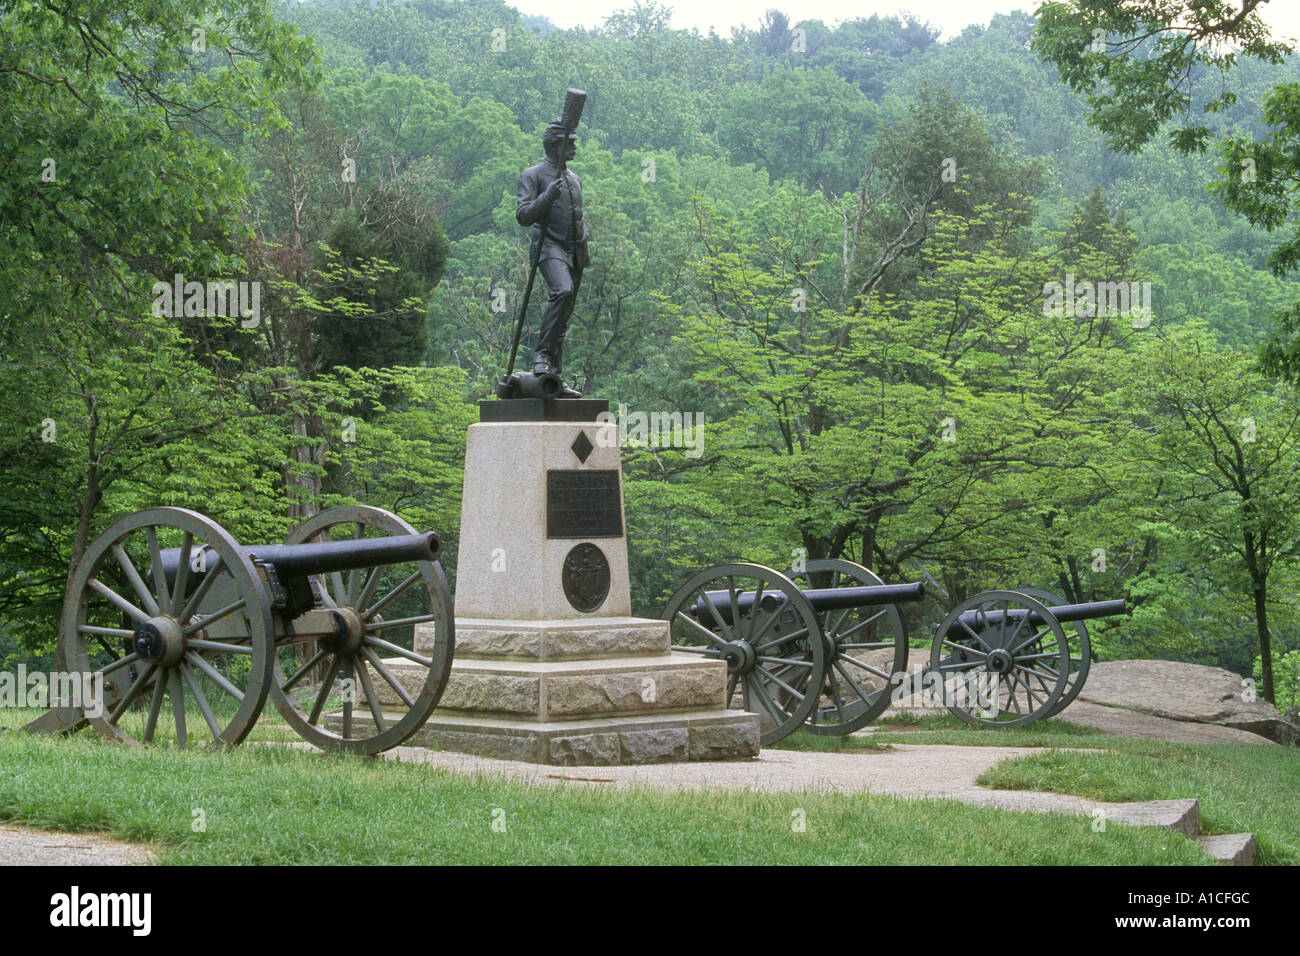 The monument to Smith's Battery of the Union army at Gettysburg sits atop Devil's Den and Houck's Ridge at Gettysburg, Pa. Stock Photo